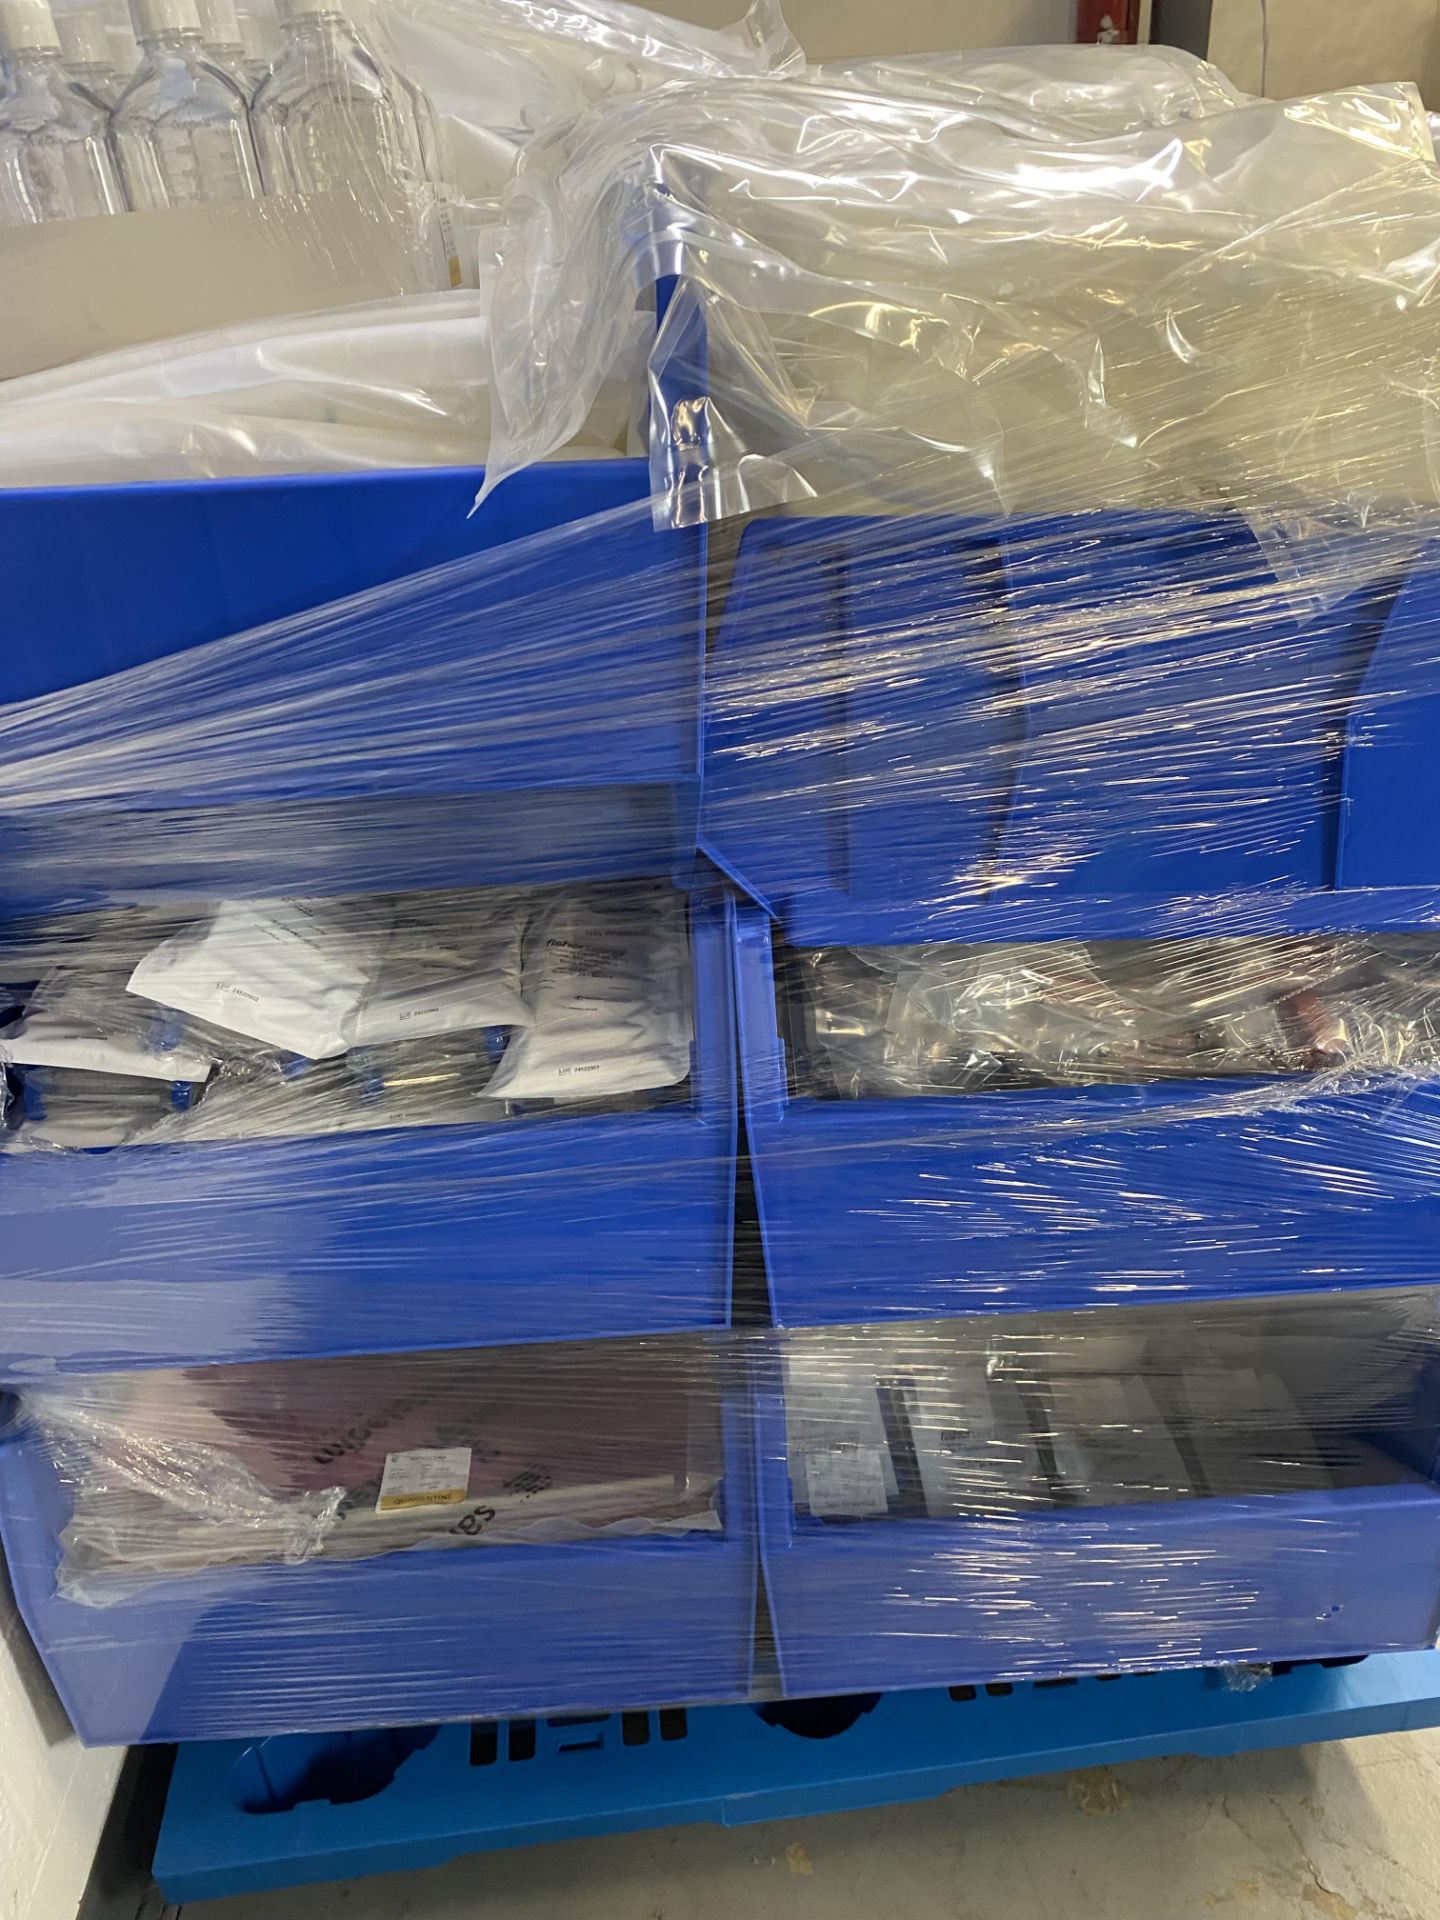 {LOT} Of Consumables on Pallet of Approx. 6 Boxes c/o: Thermo Scientific Bottles, Film and Tubes, - Image 2 of 2